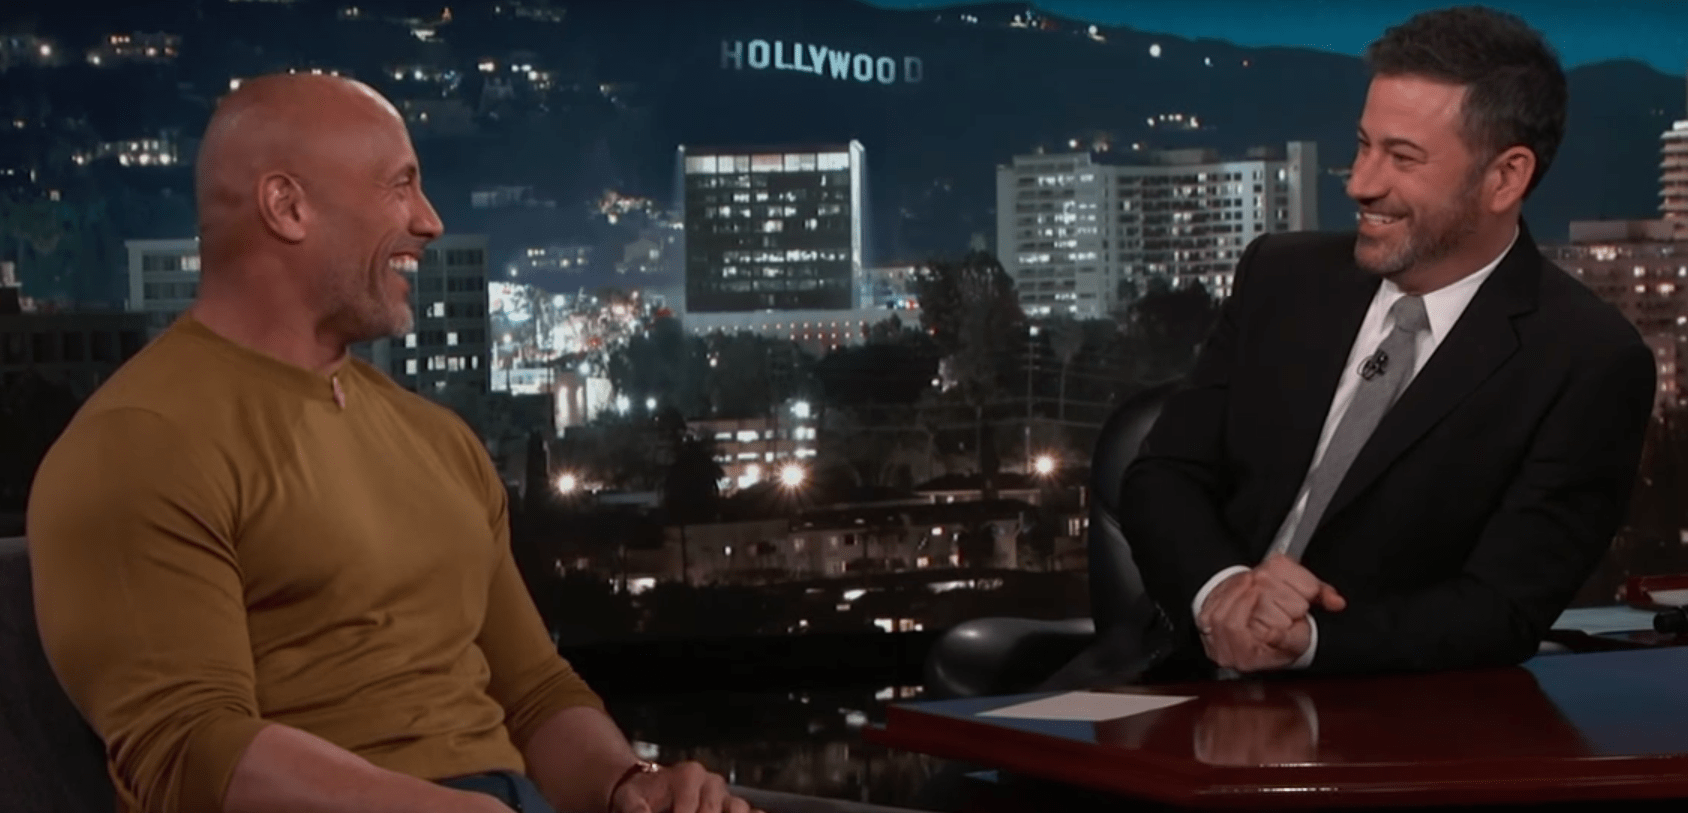 Dwayne Johnson, AKA The Rock, on 'Jimmy Kimmel Live!' asking Jimmy Kimmel to help deliver his baby (YouTube)